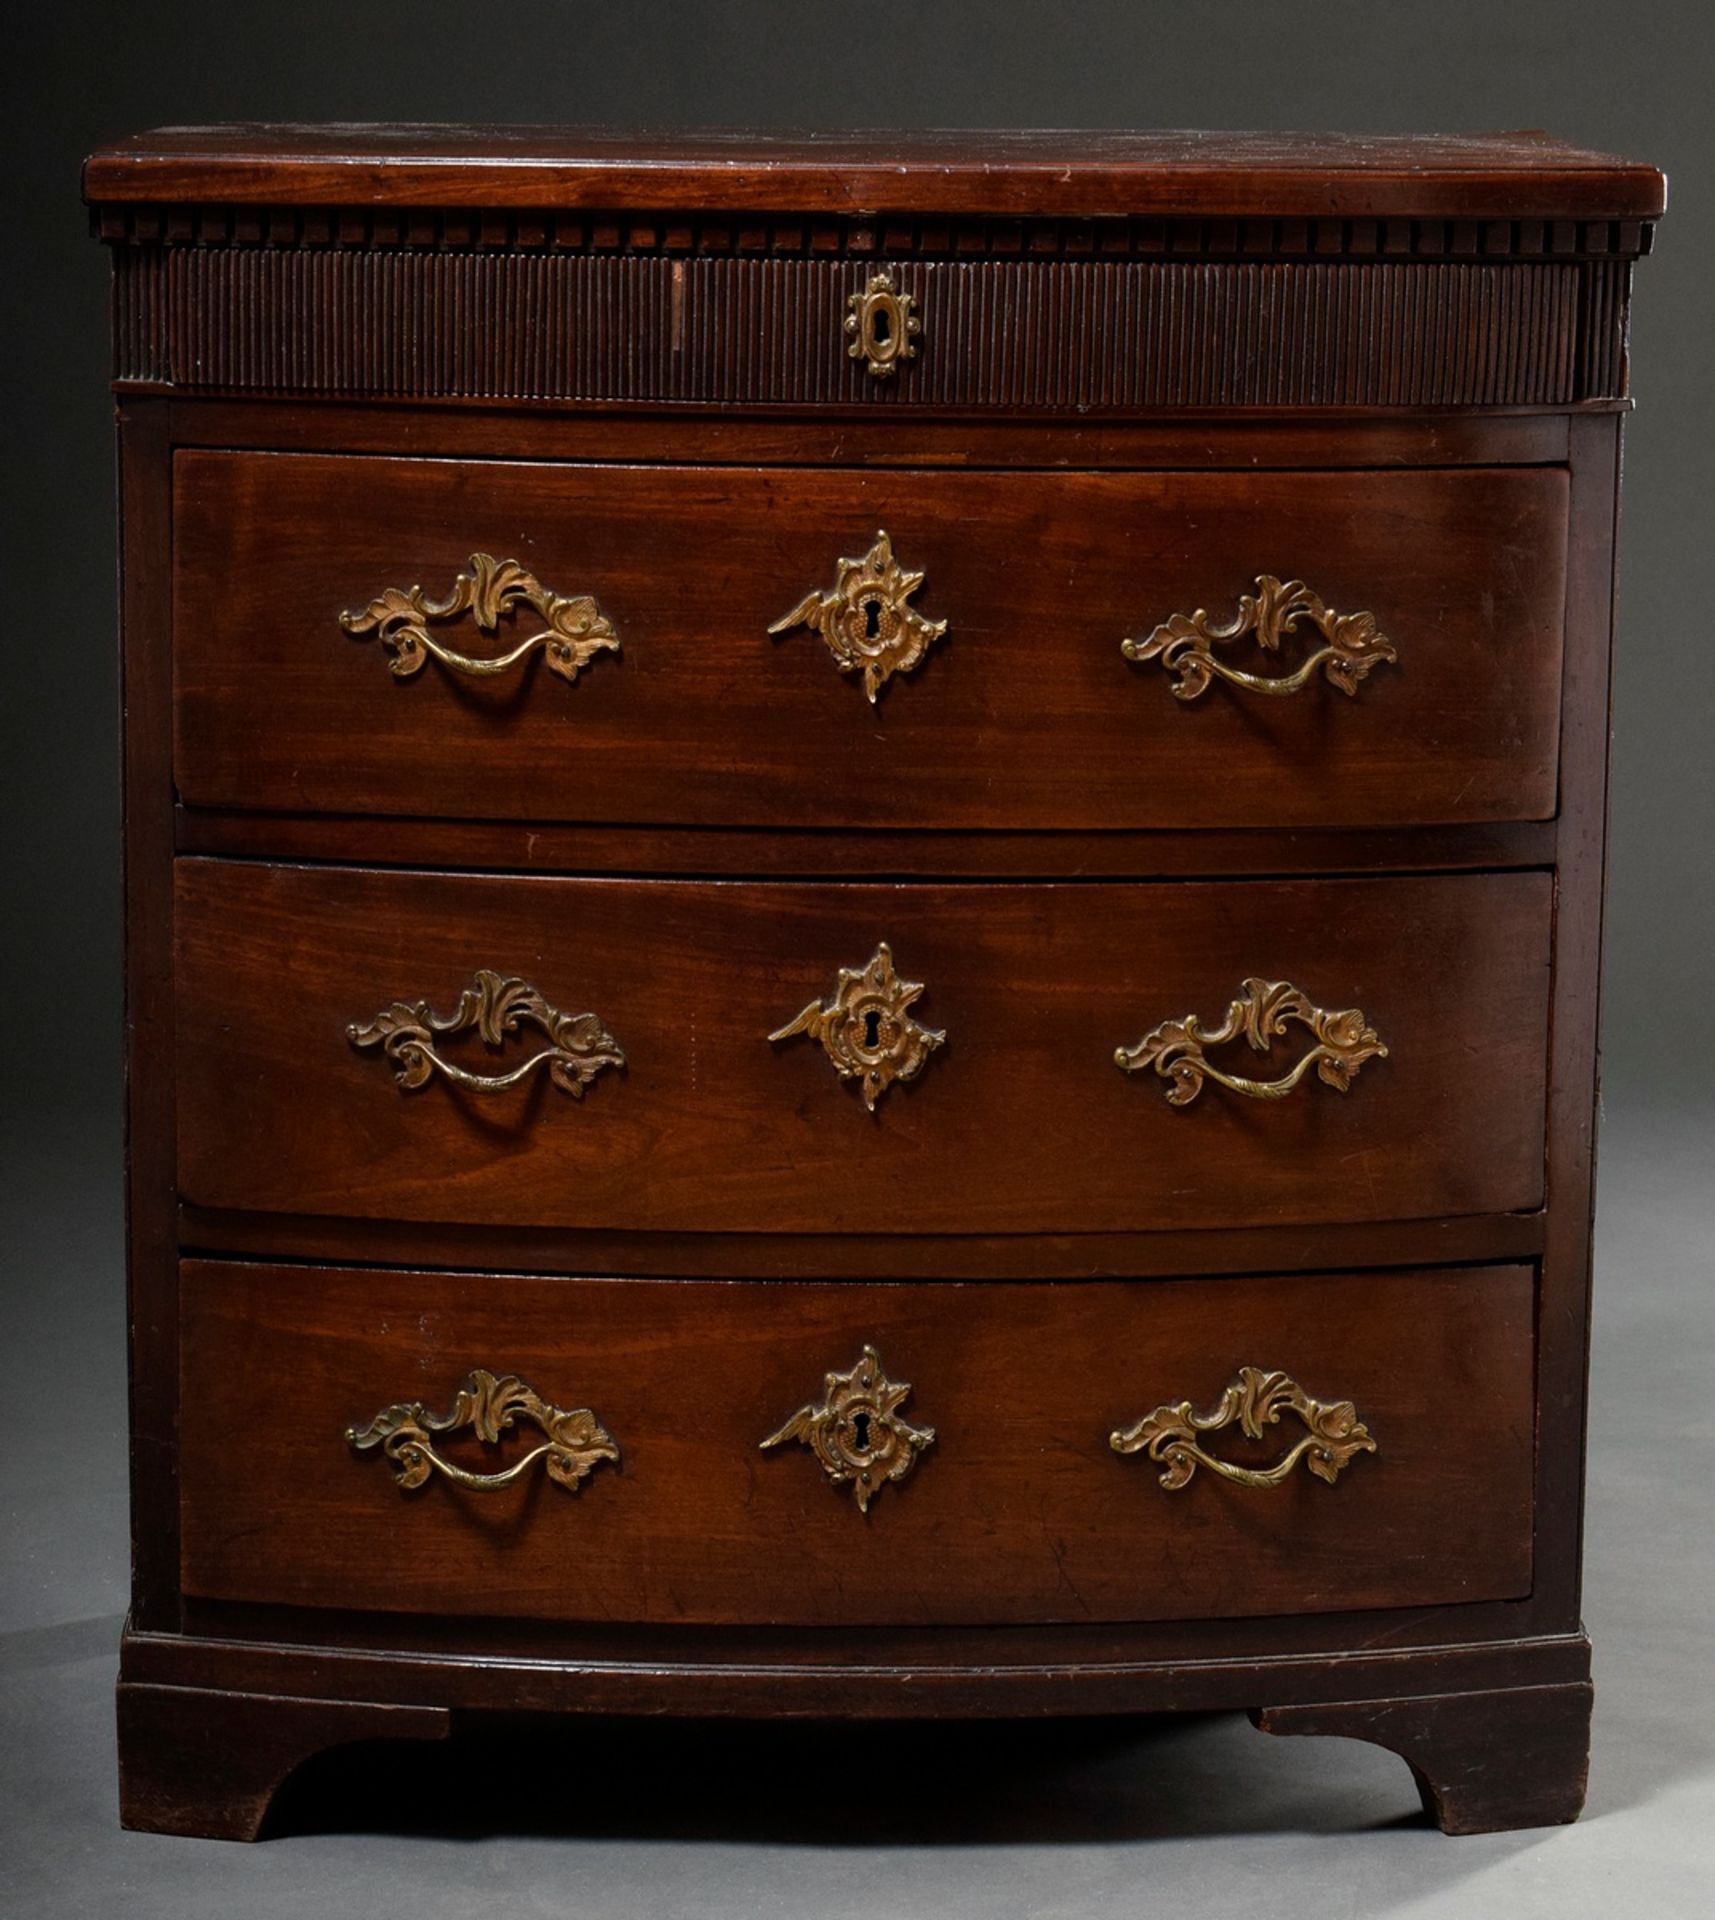 North German demilune chest of drawers with calf tooth and groove moulding, mahogany, c. 1780/1800, - Image 2 of 6